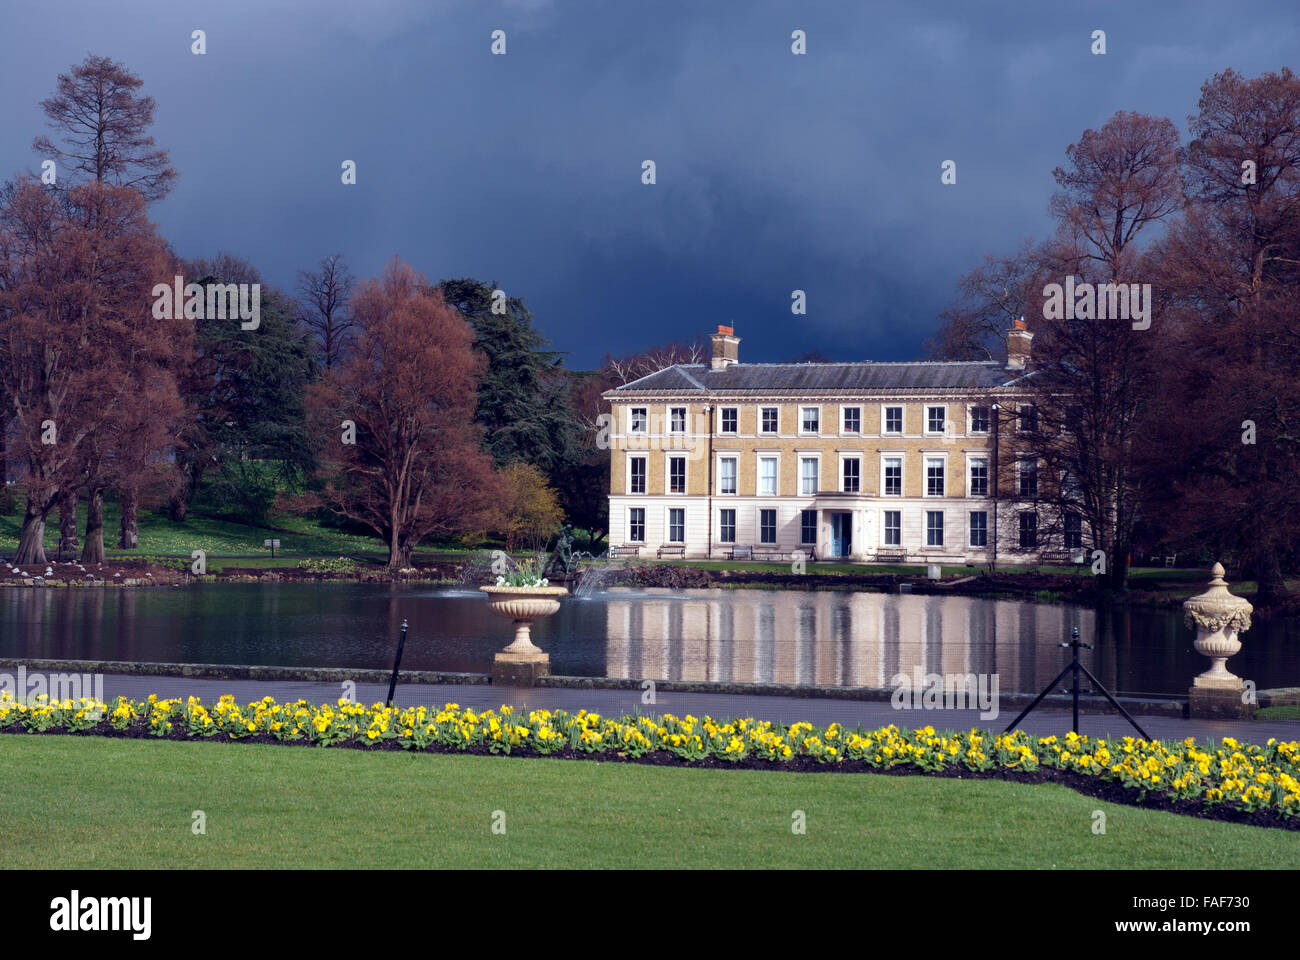 The Kew Museum and lake on a stormy day Kew Gardens London England UK Stock Photo